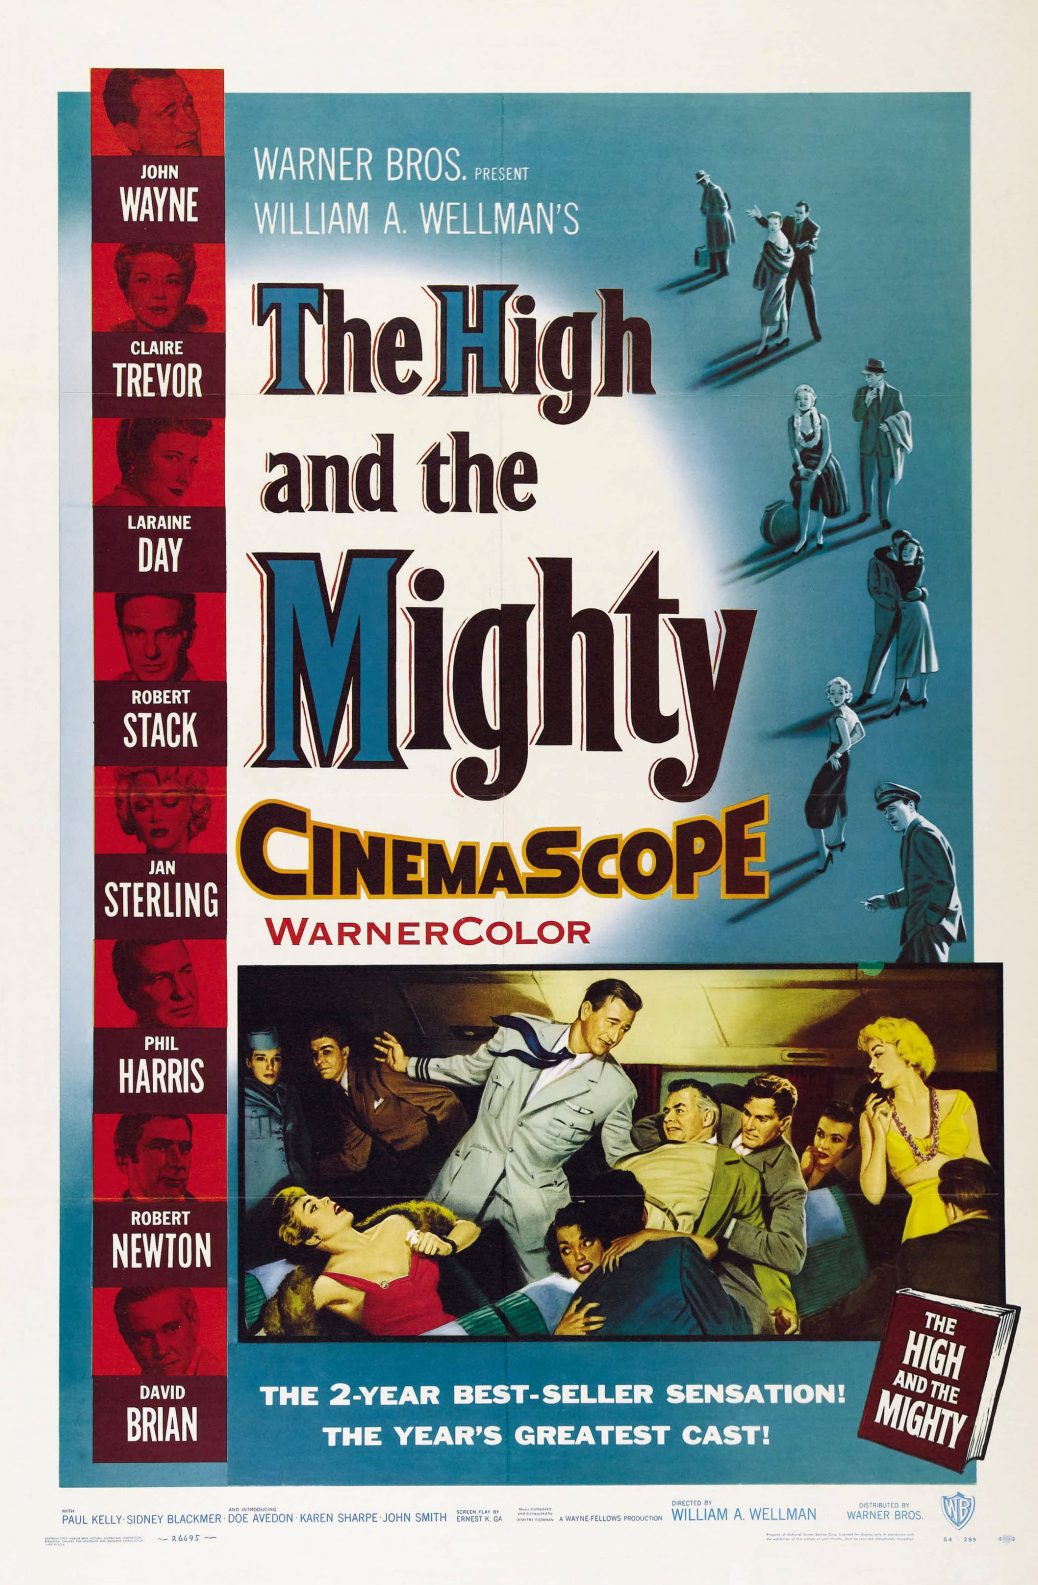 Poster for the movie "The High and the Mighty"